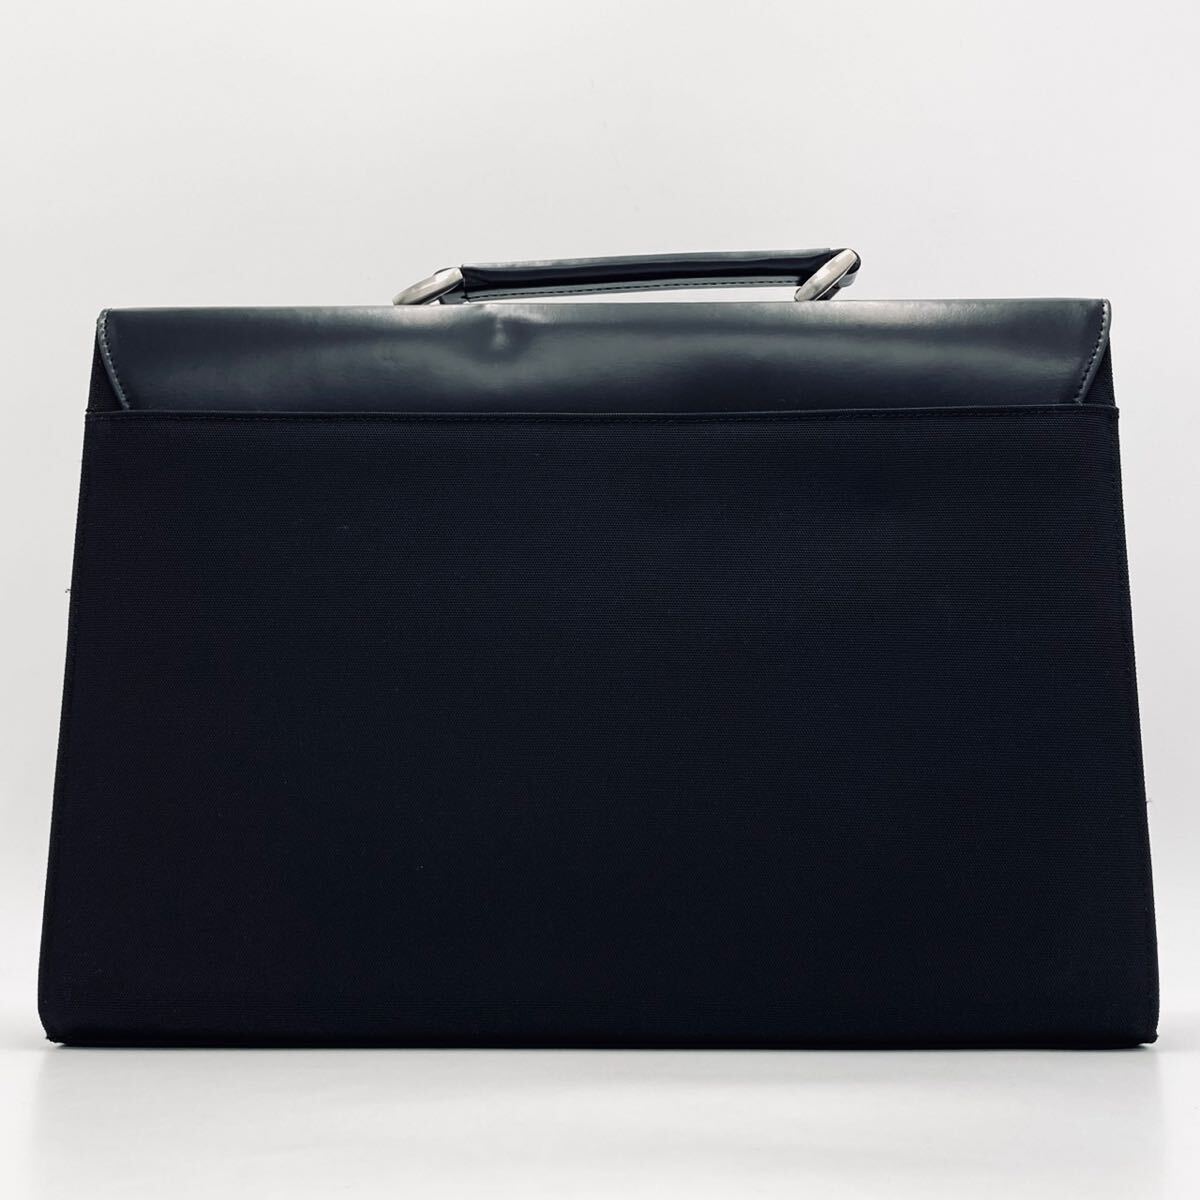 1 jpy ~[ new goods unused accessory equipping ] dunhill Dunhill high class car f leather men's business bag briefcase A4+PC possible 3. high capacity commuting key attaching black 